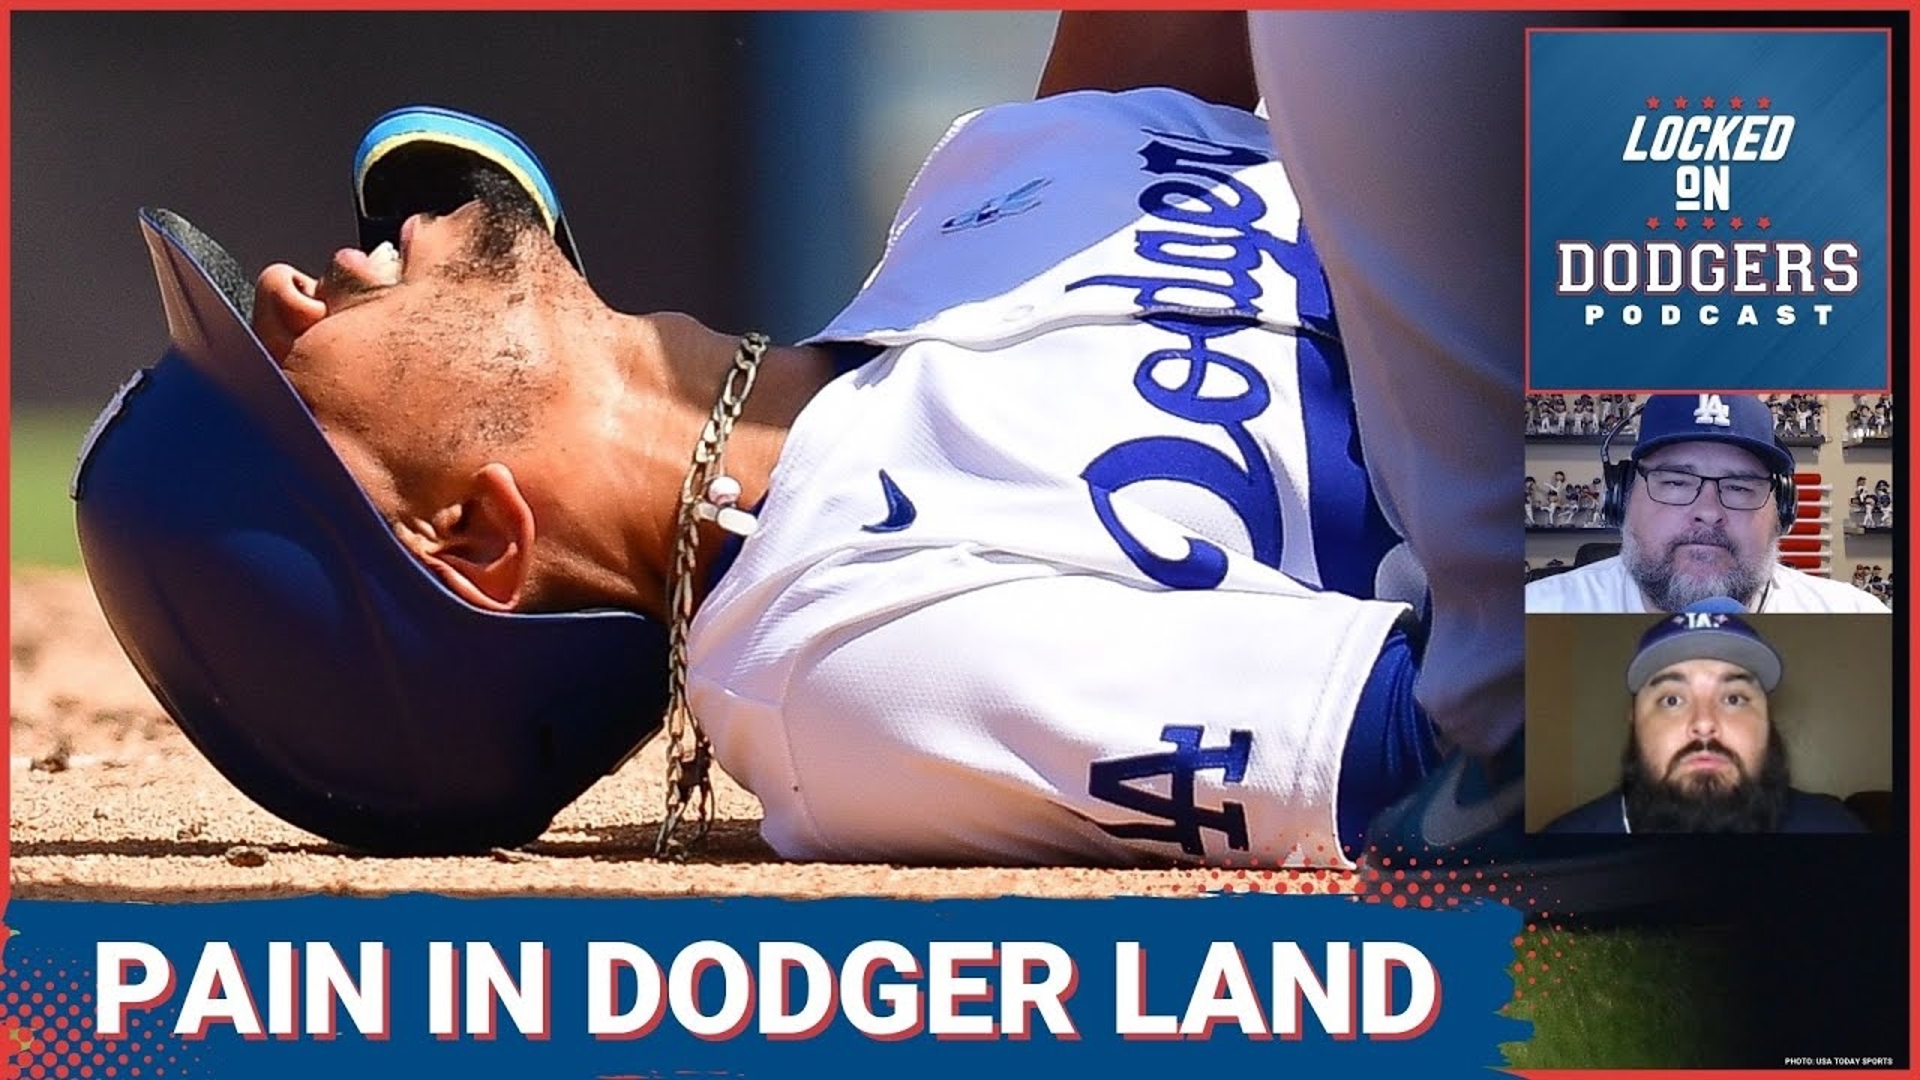 It was a bittersweet weekend for the Dodgers as they took the series against the Royals but lost Mookie Betts and Yoshinobu Yamamoto to injury.